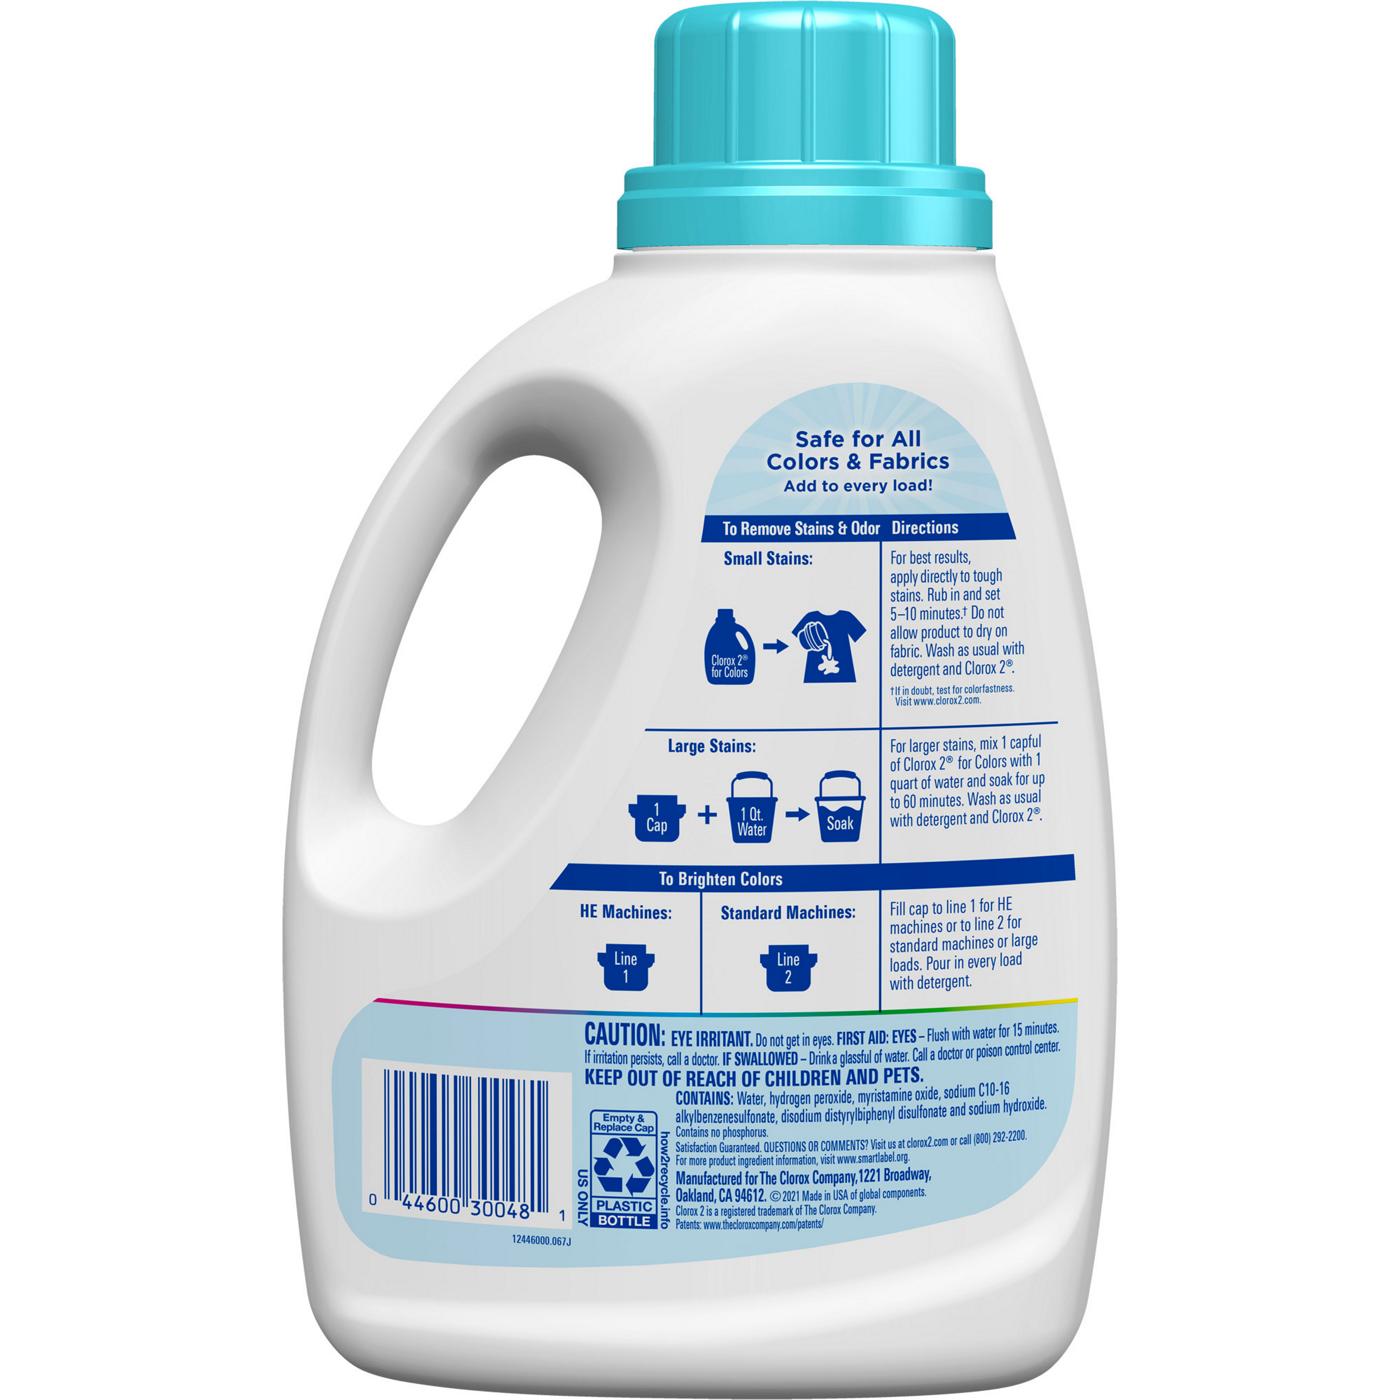 Clorox 2 2 for Colors 3-in-1 HE Laundry Additive, 48 Loads - Free & Clear; image 2 of 3